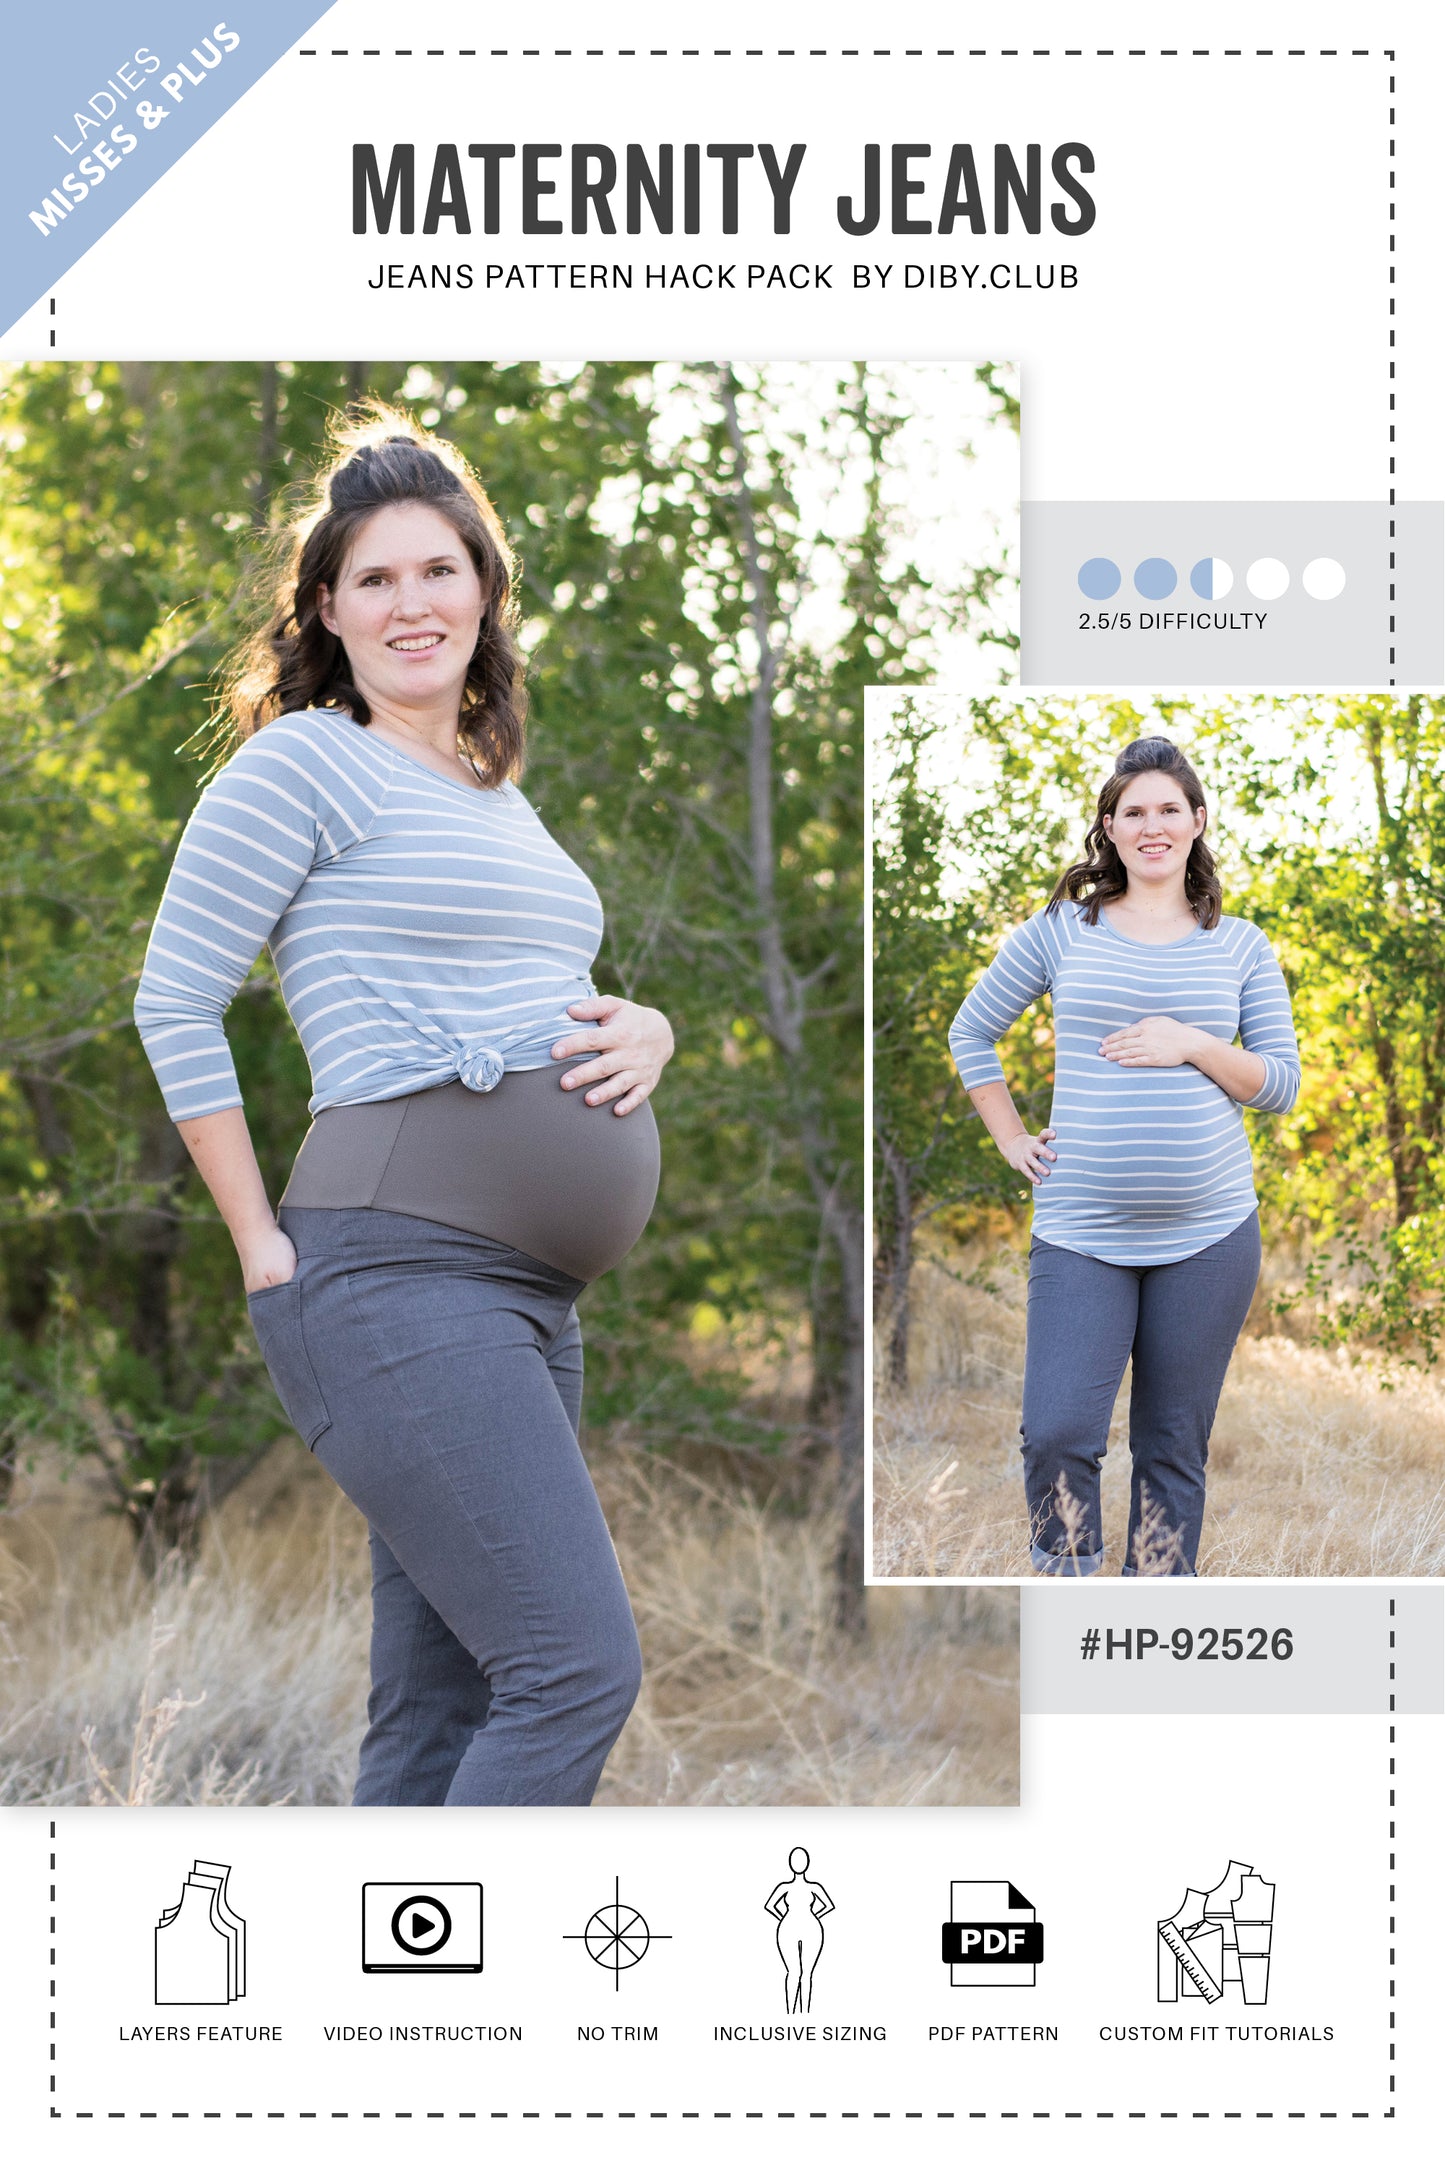 Maternity Jeans Hack Pack